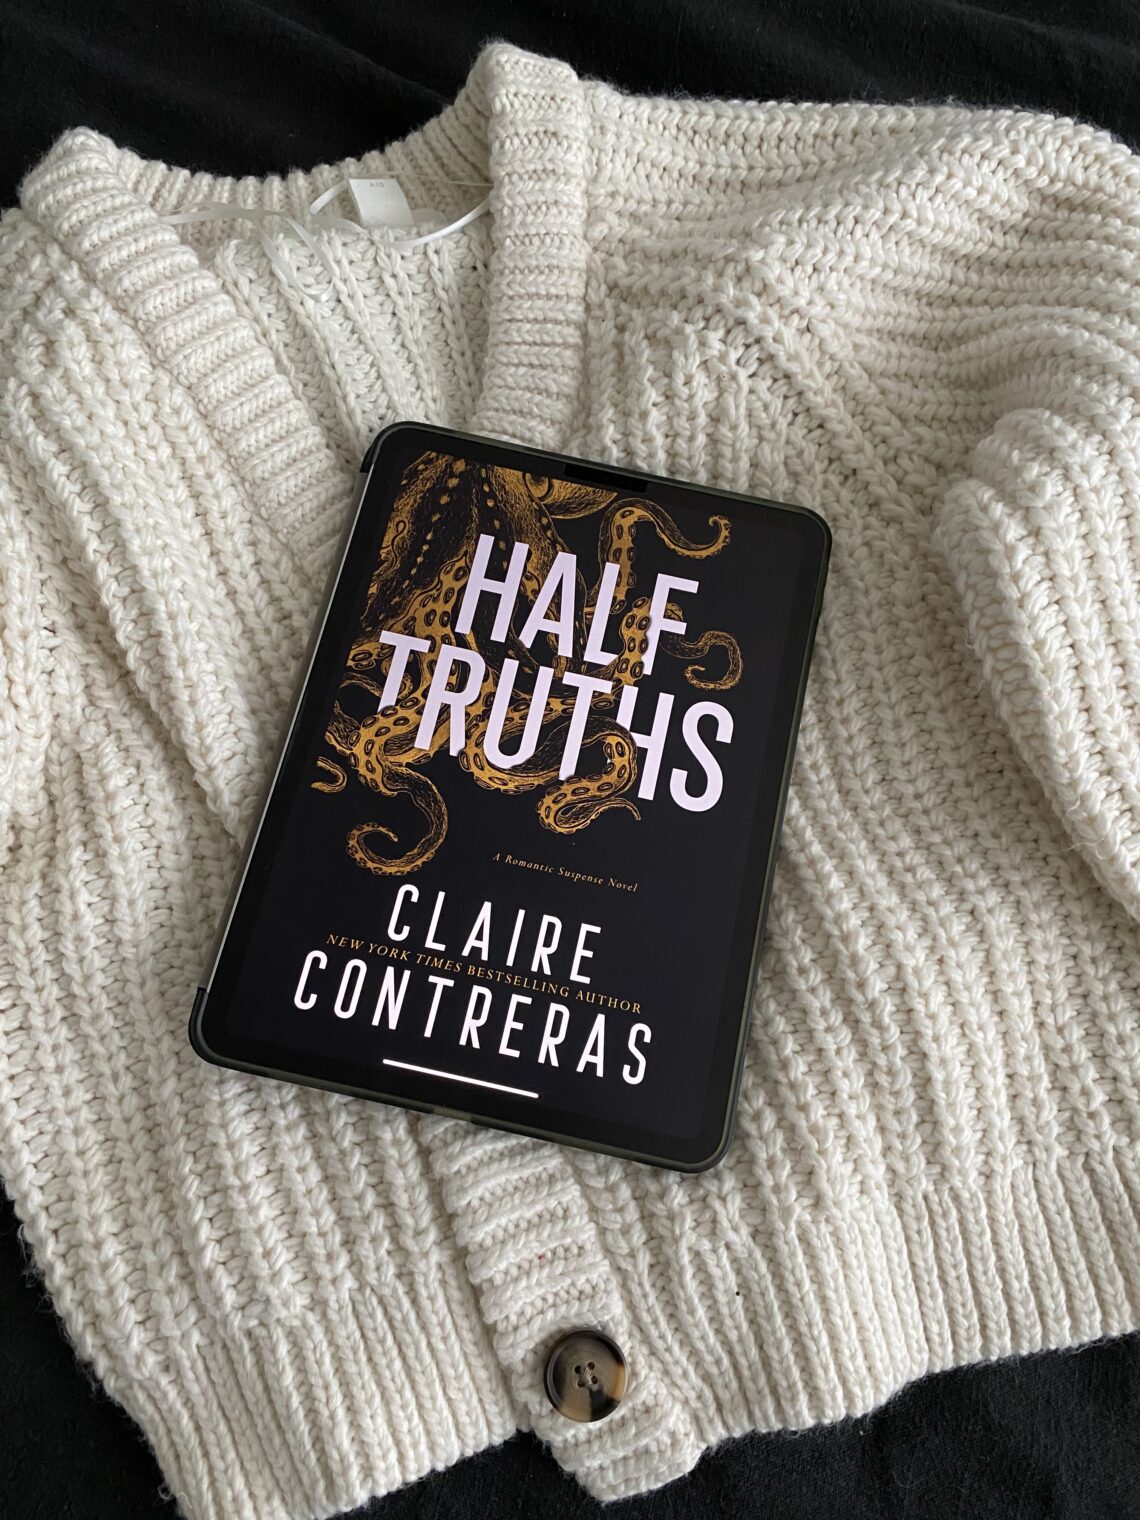 Half Truths by Claire Contreras Book Review